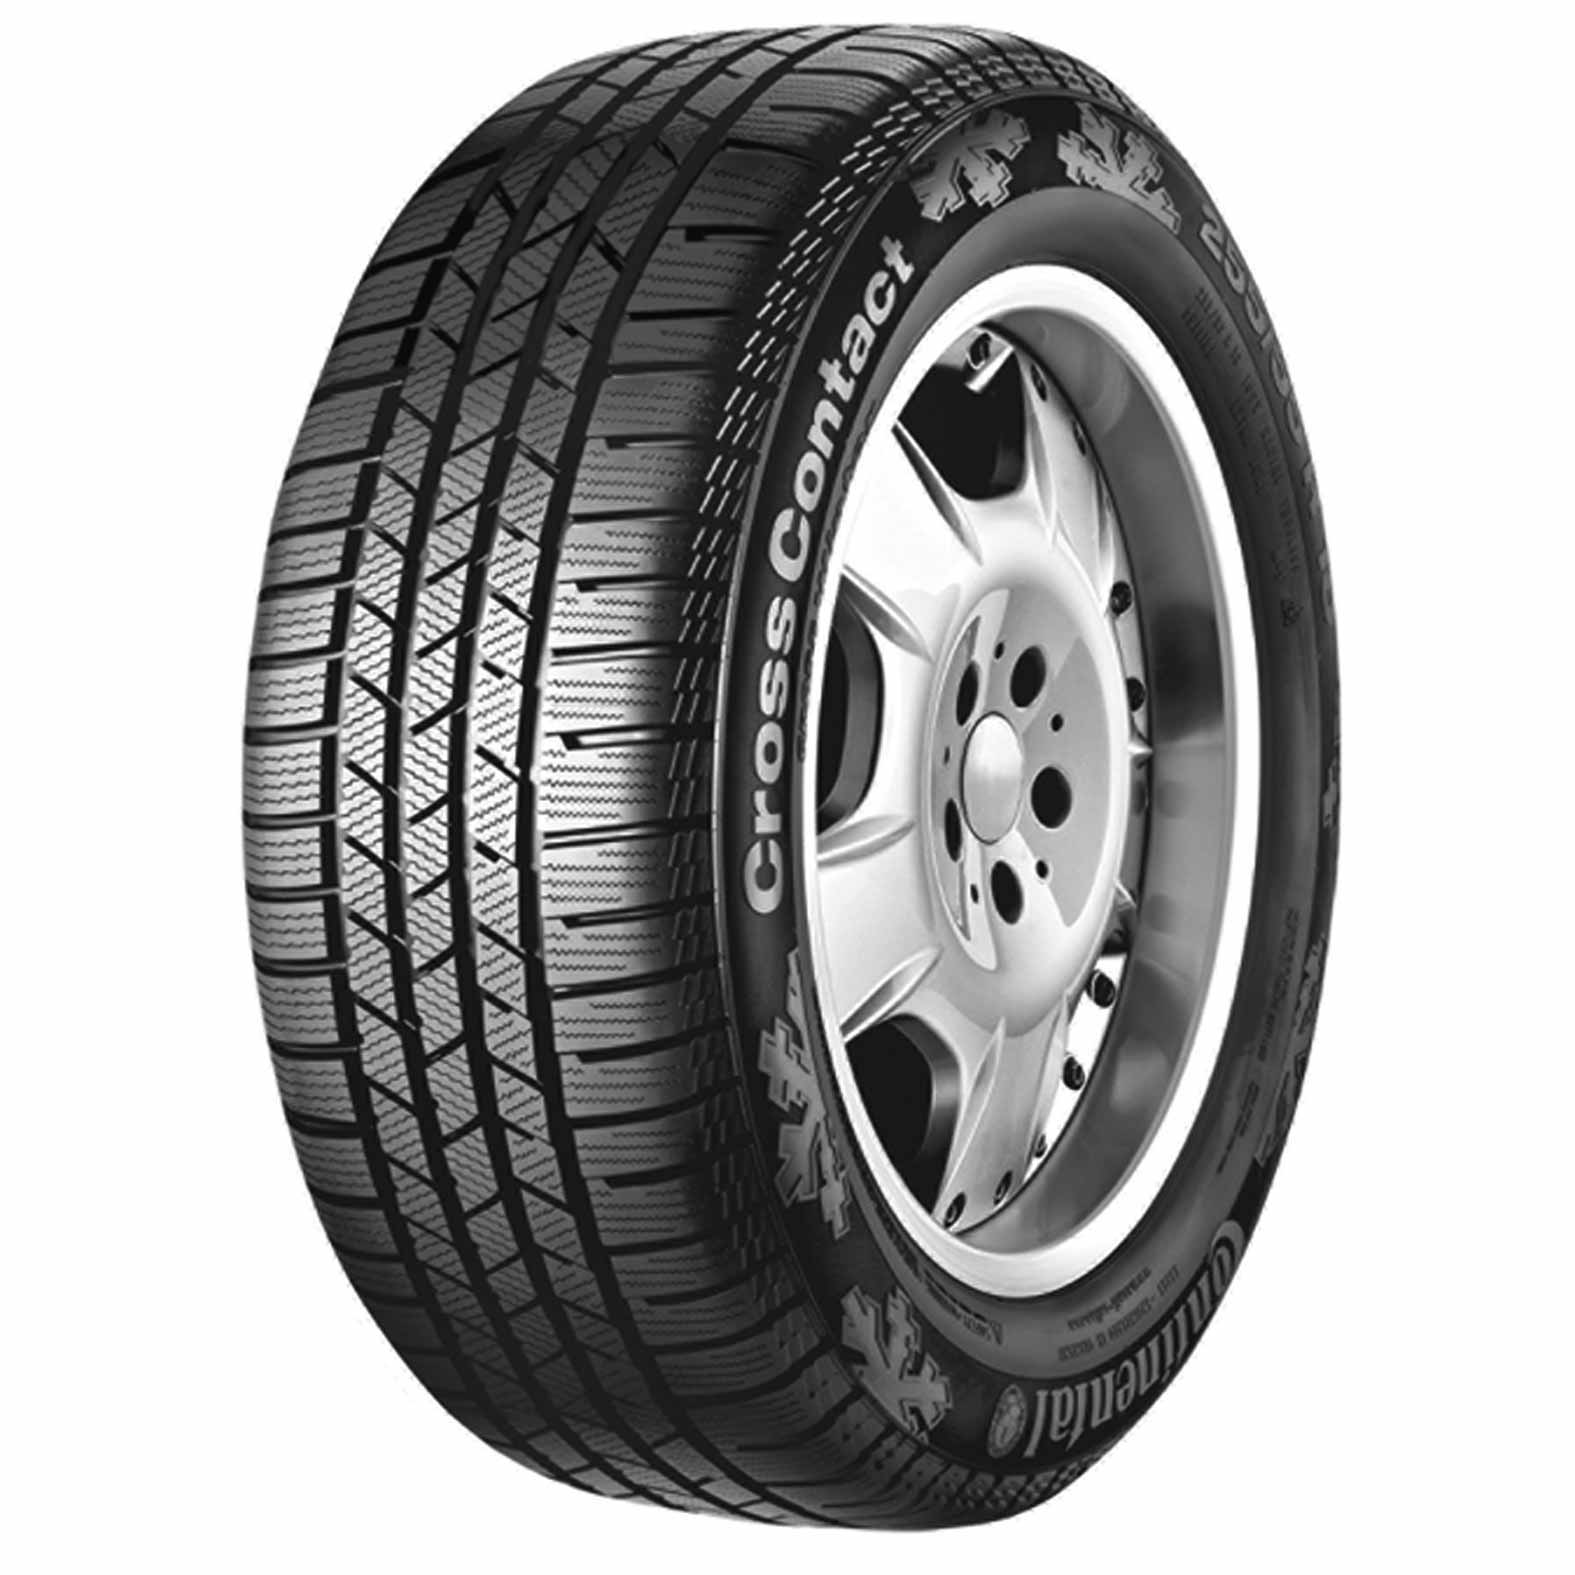 Tire Kal Continental Tires for Winter ContiCrossContact | Winter